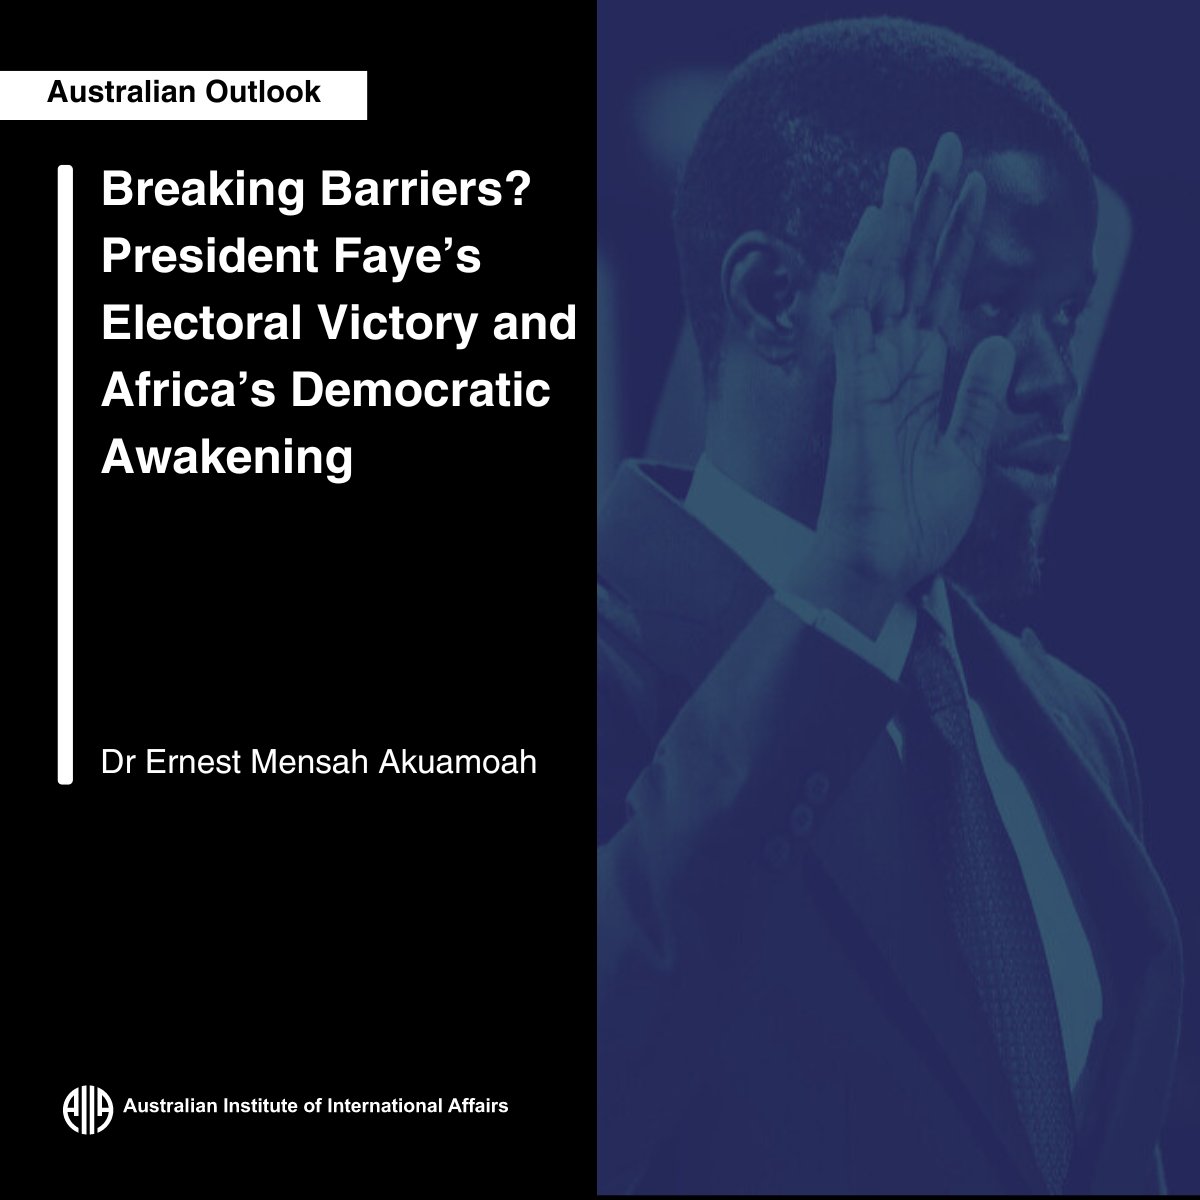 'Bassirou Diomaye Faye, is a glimmer of hope in an era of democratic backsliding...he should seek to inspire a democratic revival among young Africans,” discussed by Dr Ernest Mensah Akuamoah Read more at Australian Outlook👇 ow.ly/wEuG50RhMWy